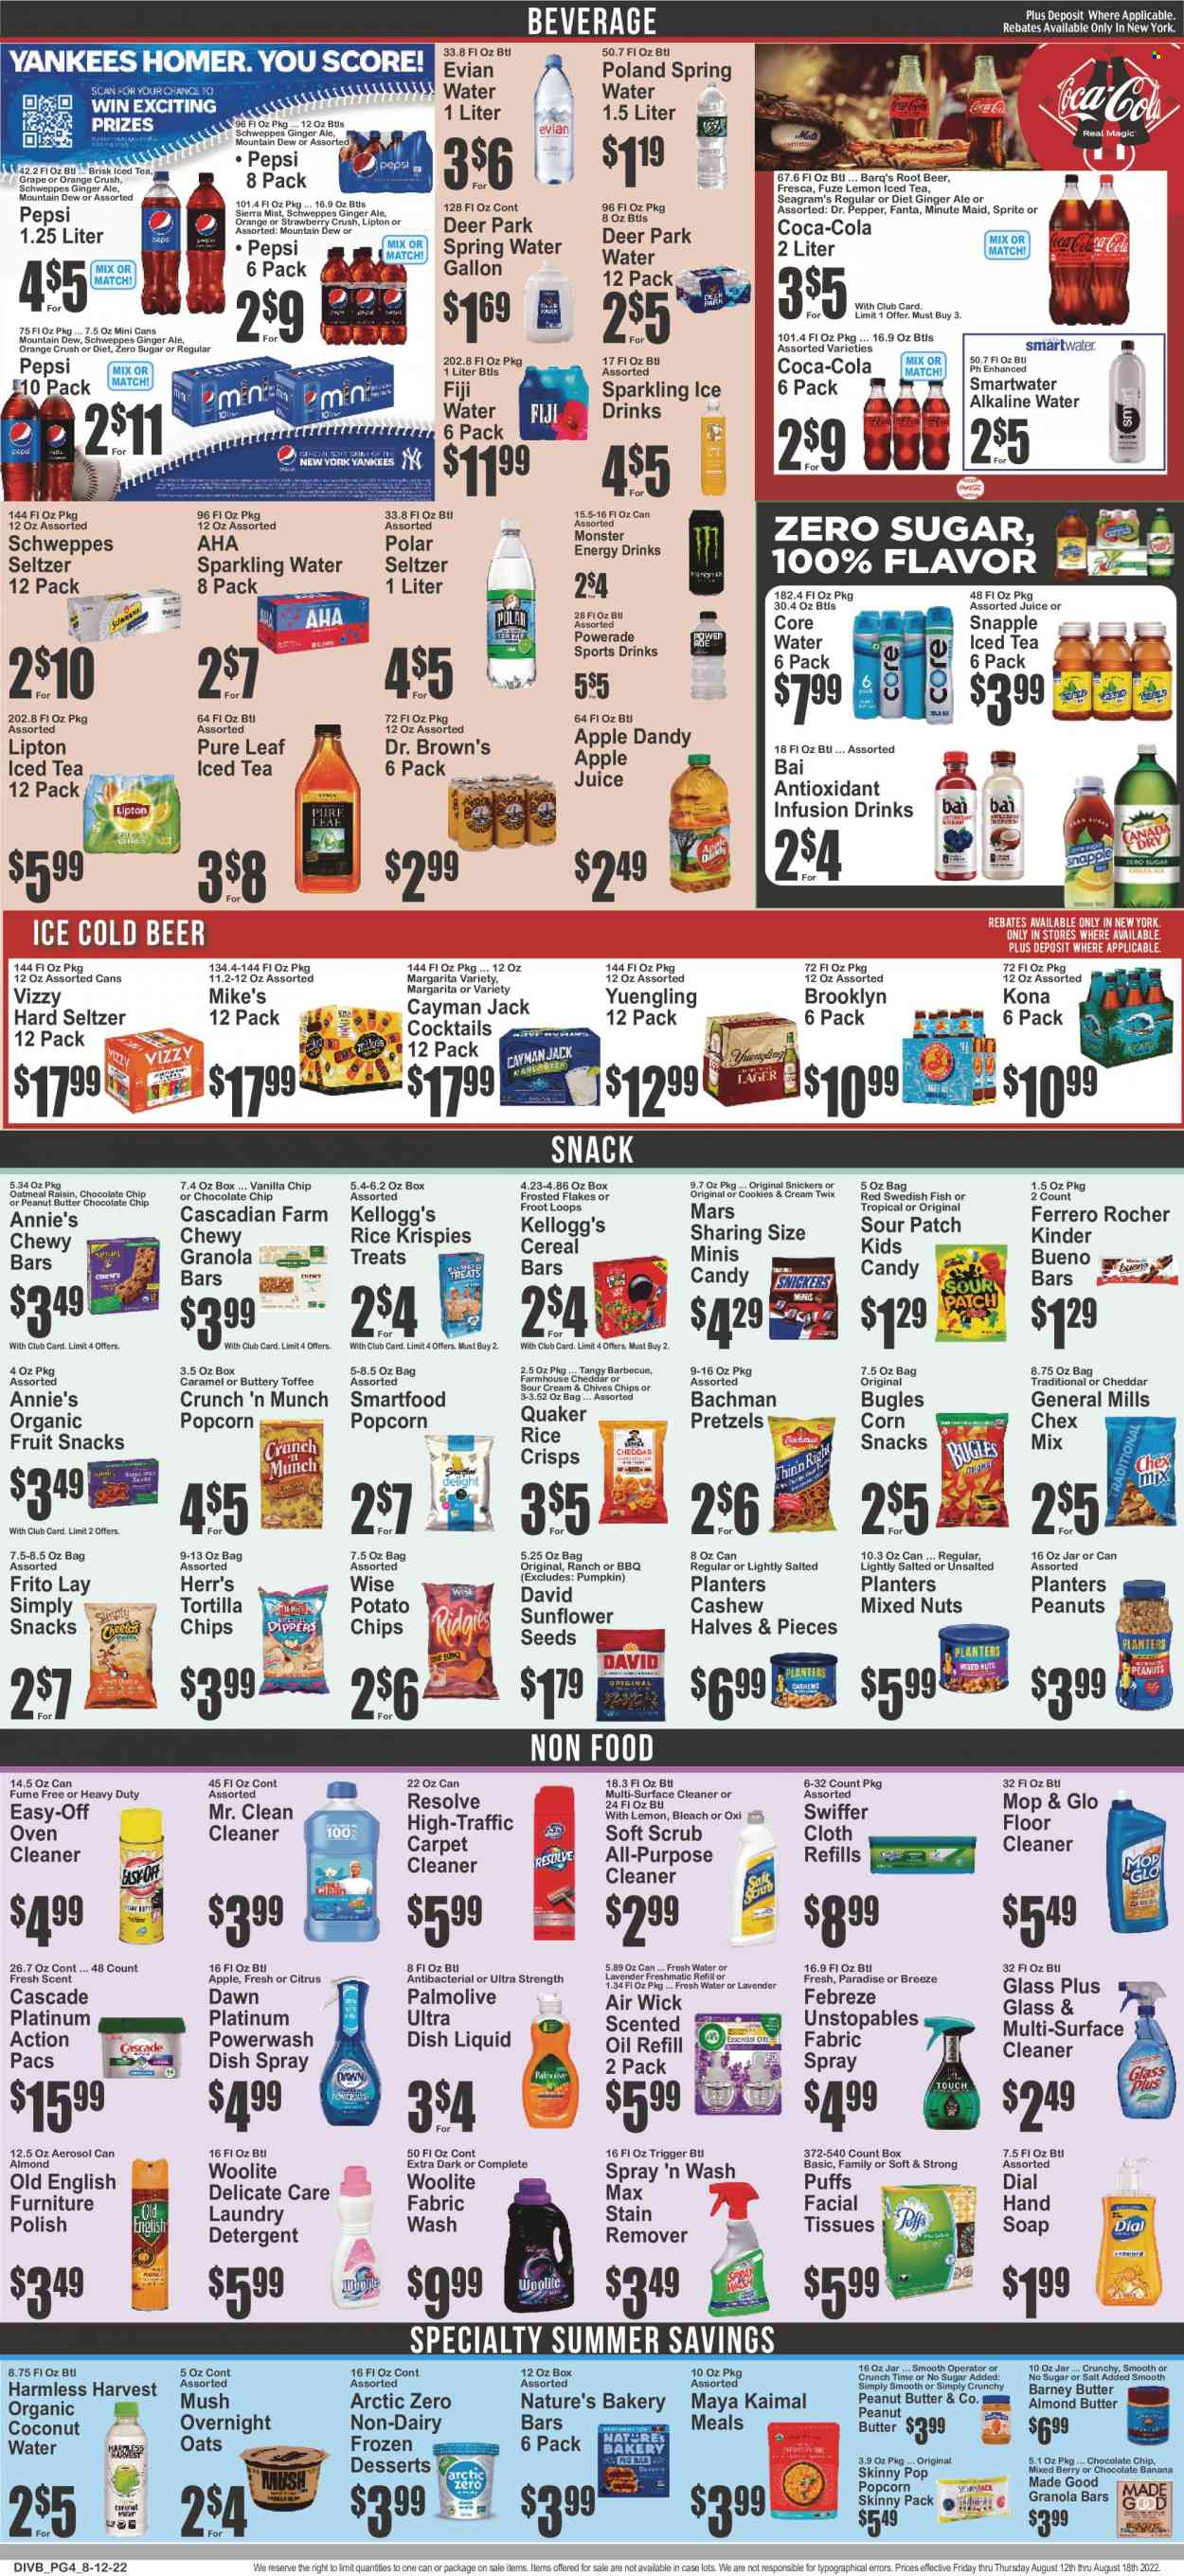 thumbnail - Super Fresh Flyer - 08/12/2022 - 08/18/2022 - Sales products - pretzels, puffs, pumpkin, chives, oranges, Quaker, Annie's, cheese, almond butter, cookies, Ferrero Rocher, Snickers, Twix, Mars, toffee, cereal bar, Kellogg's, Kinder Bueno, fruit snack, sour patch, tortilla chips, potato chips, Smartfood, popcorn, rice crisps, Skinny Pop, Chex Mix, oatmeal, cereals, granola bar, Rice Krispies, Frosted Flakes, oil, peanuts, sunflower seeds, mixed nuts, Planters, apple juice, Coca-Cola, ginger ale, Mountain Dew, Schweppes, Sprite, Powerade, Pepsi, juice, Fanta, energy drink, Monster, Lipton, ice tea, Dr. Pepper, coconut water, Monster Energy, Snapple, Dr. Brown's, Sierra Mist, Bai, fruit punch, spring water, sparkling water, Smartwater, alkaline water, Evian, Pure Leaf, Hard Seltzer, beer, tissues, detergent, Febreze, surface cleaner, cleaner, bleach, floor cleaner, stain remover, Woolite, Swiffer, Cascade, Unstopables, laundry detergent, dishwashing liquid, hand soap, Palmolive, Dial, soap, facial tissues, Yuengling. Page 4.